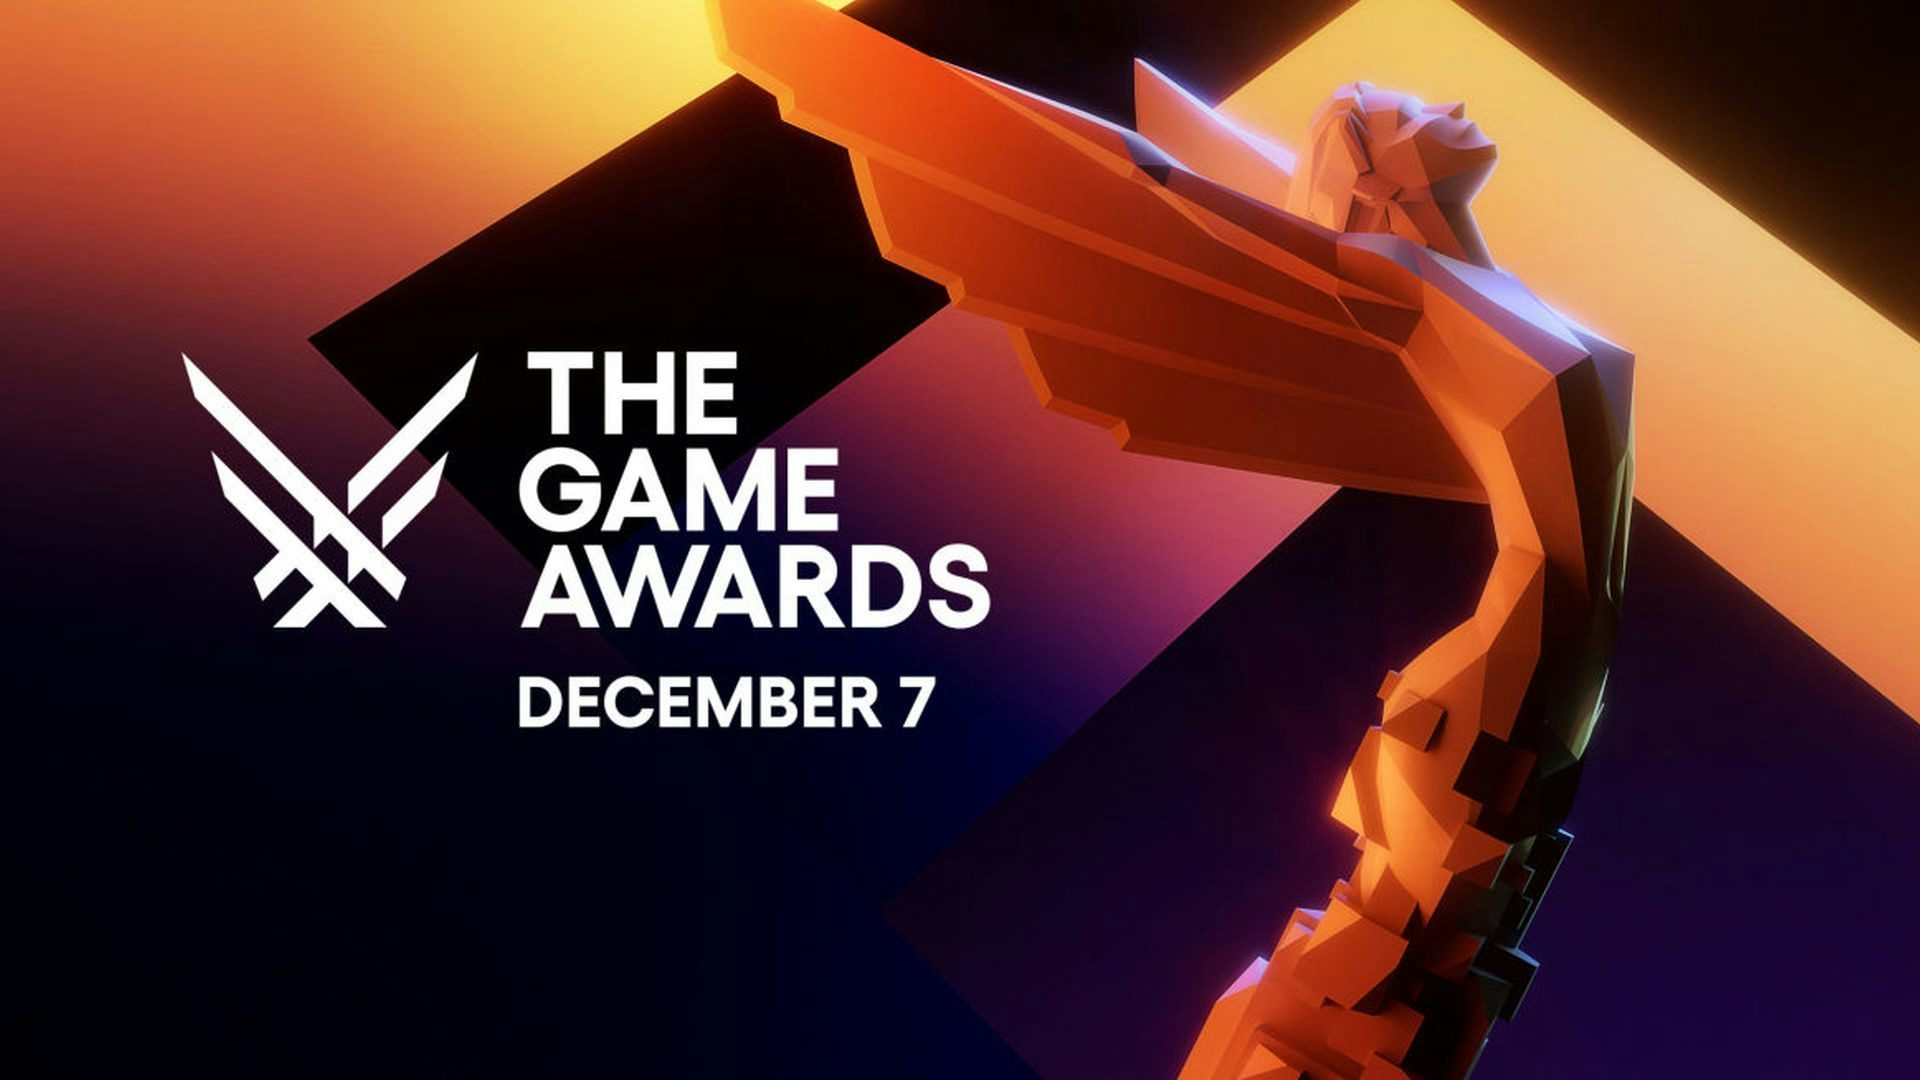 Predict a Game Awards announcement and get $4 if you're right!